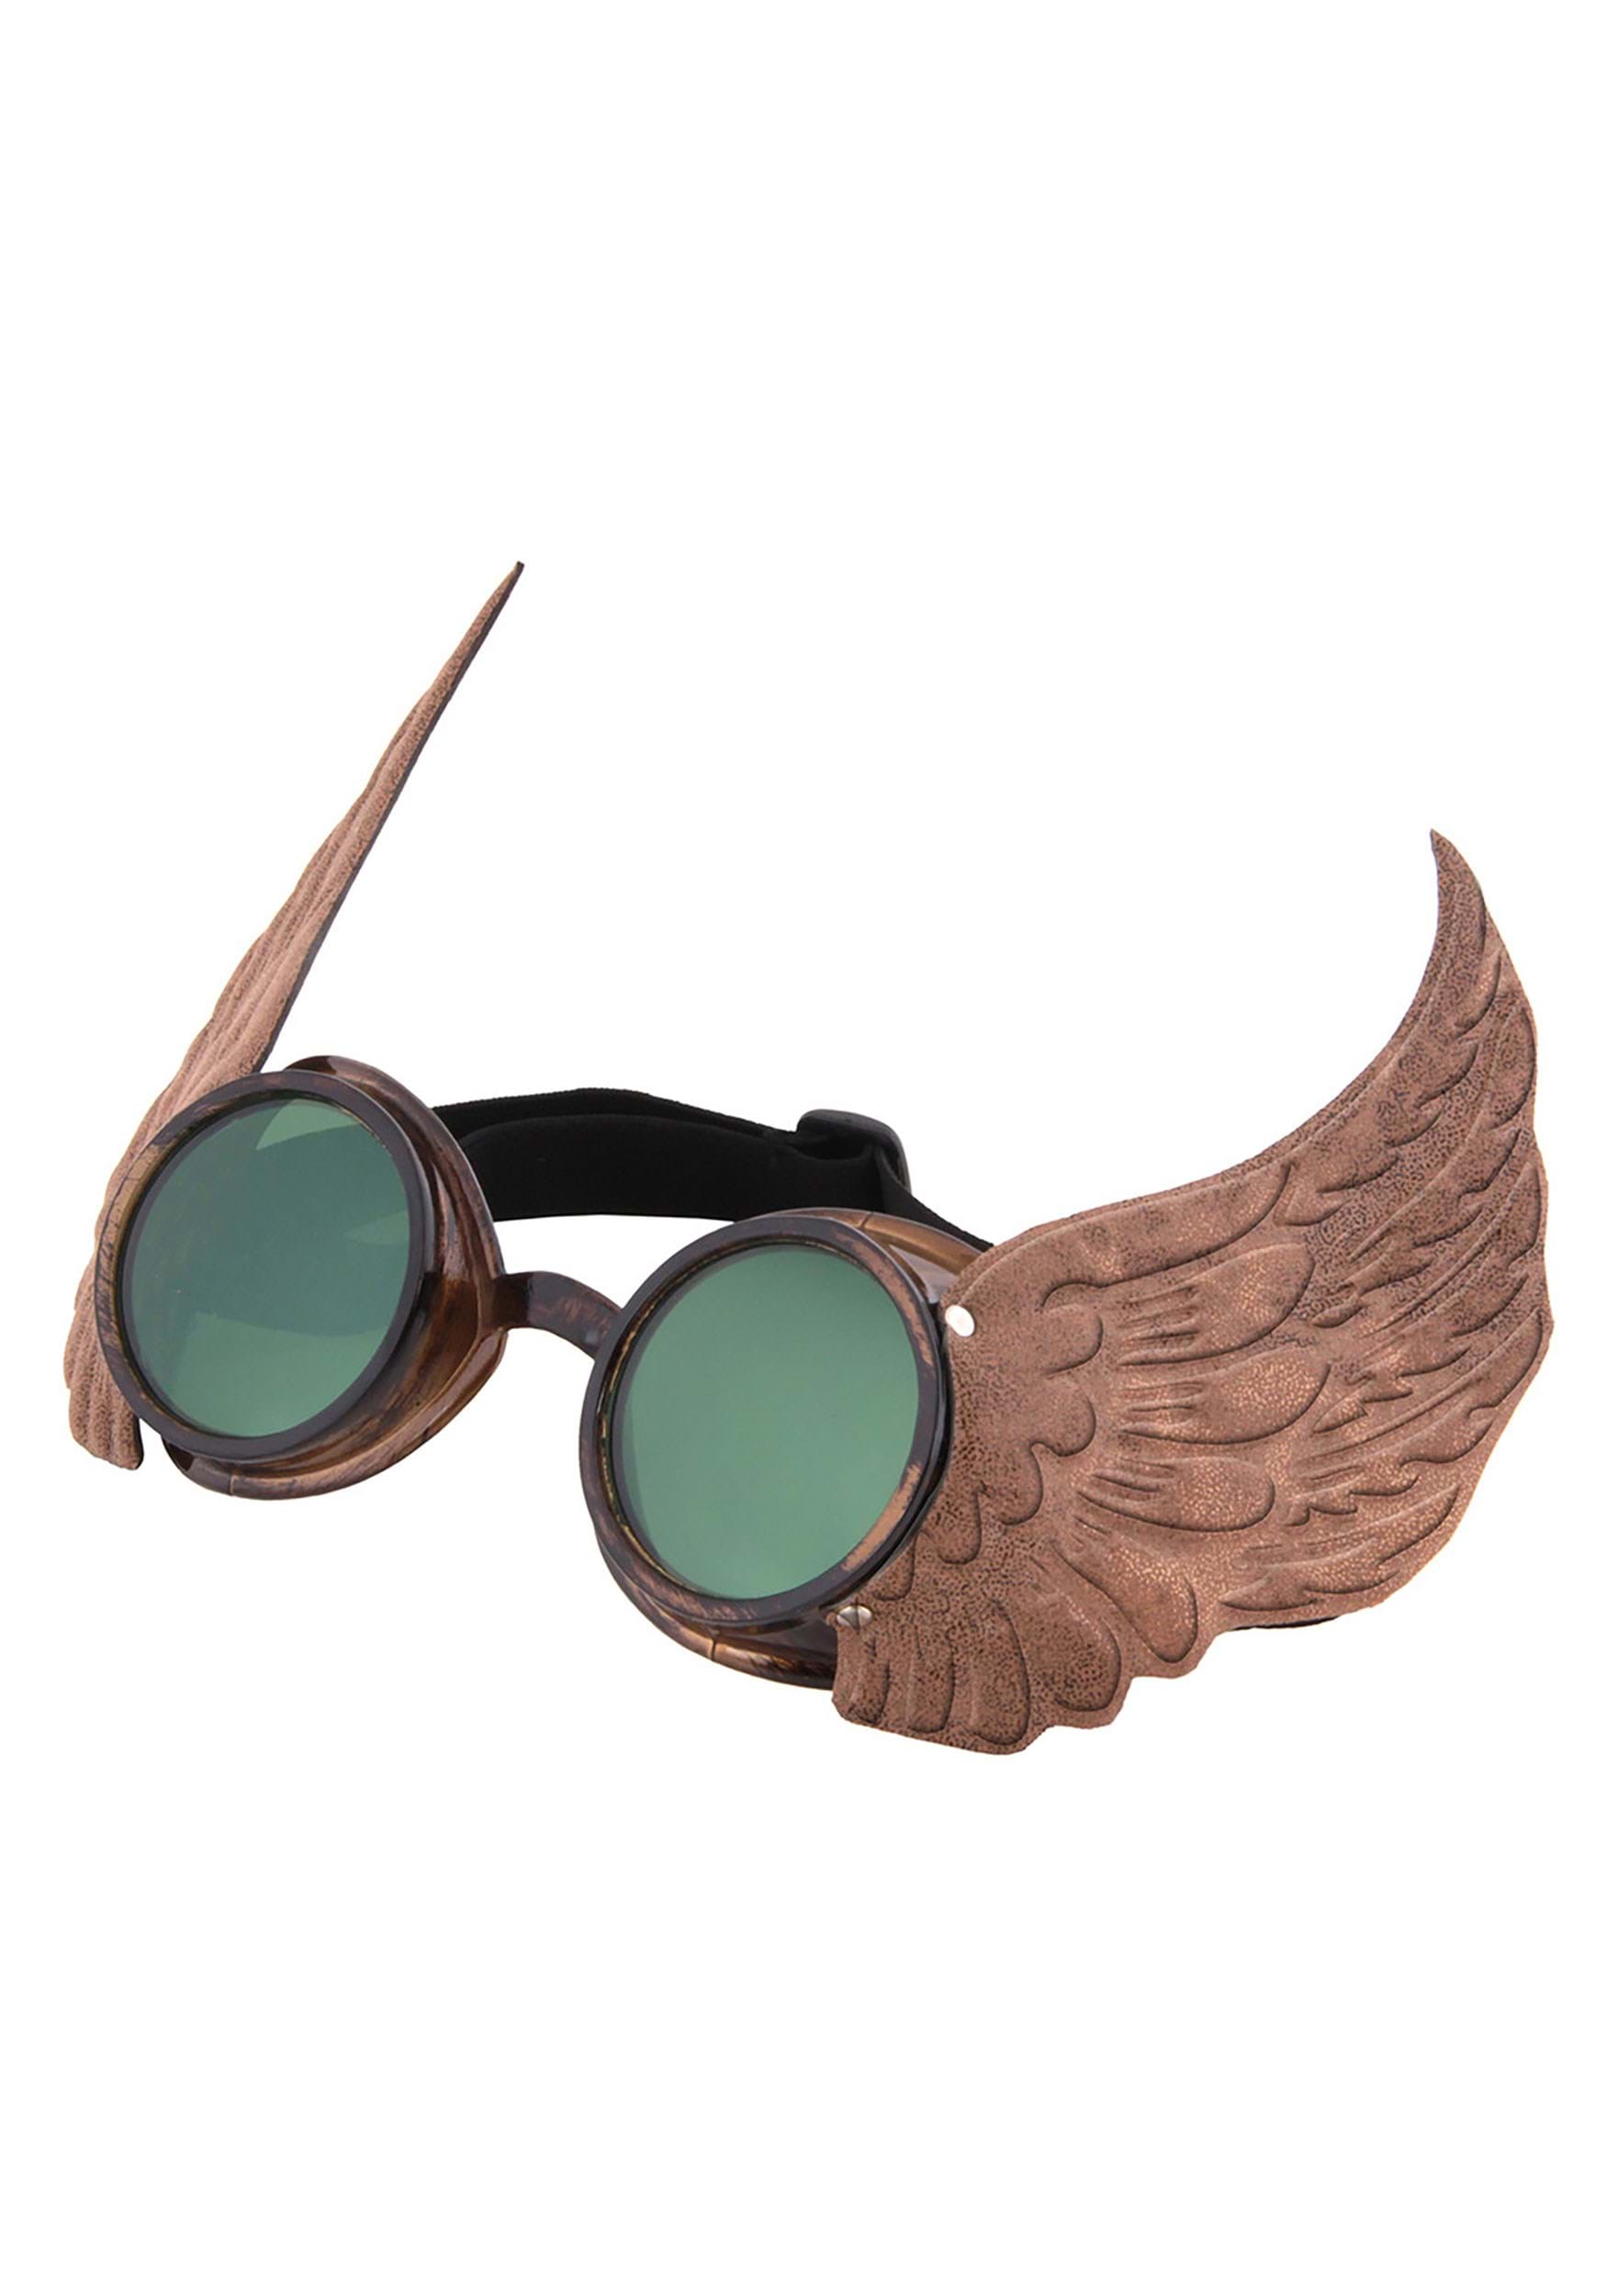 Winged Gold Goggles